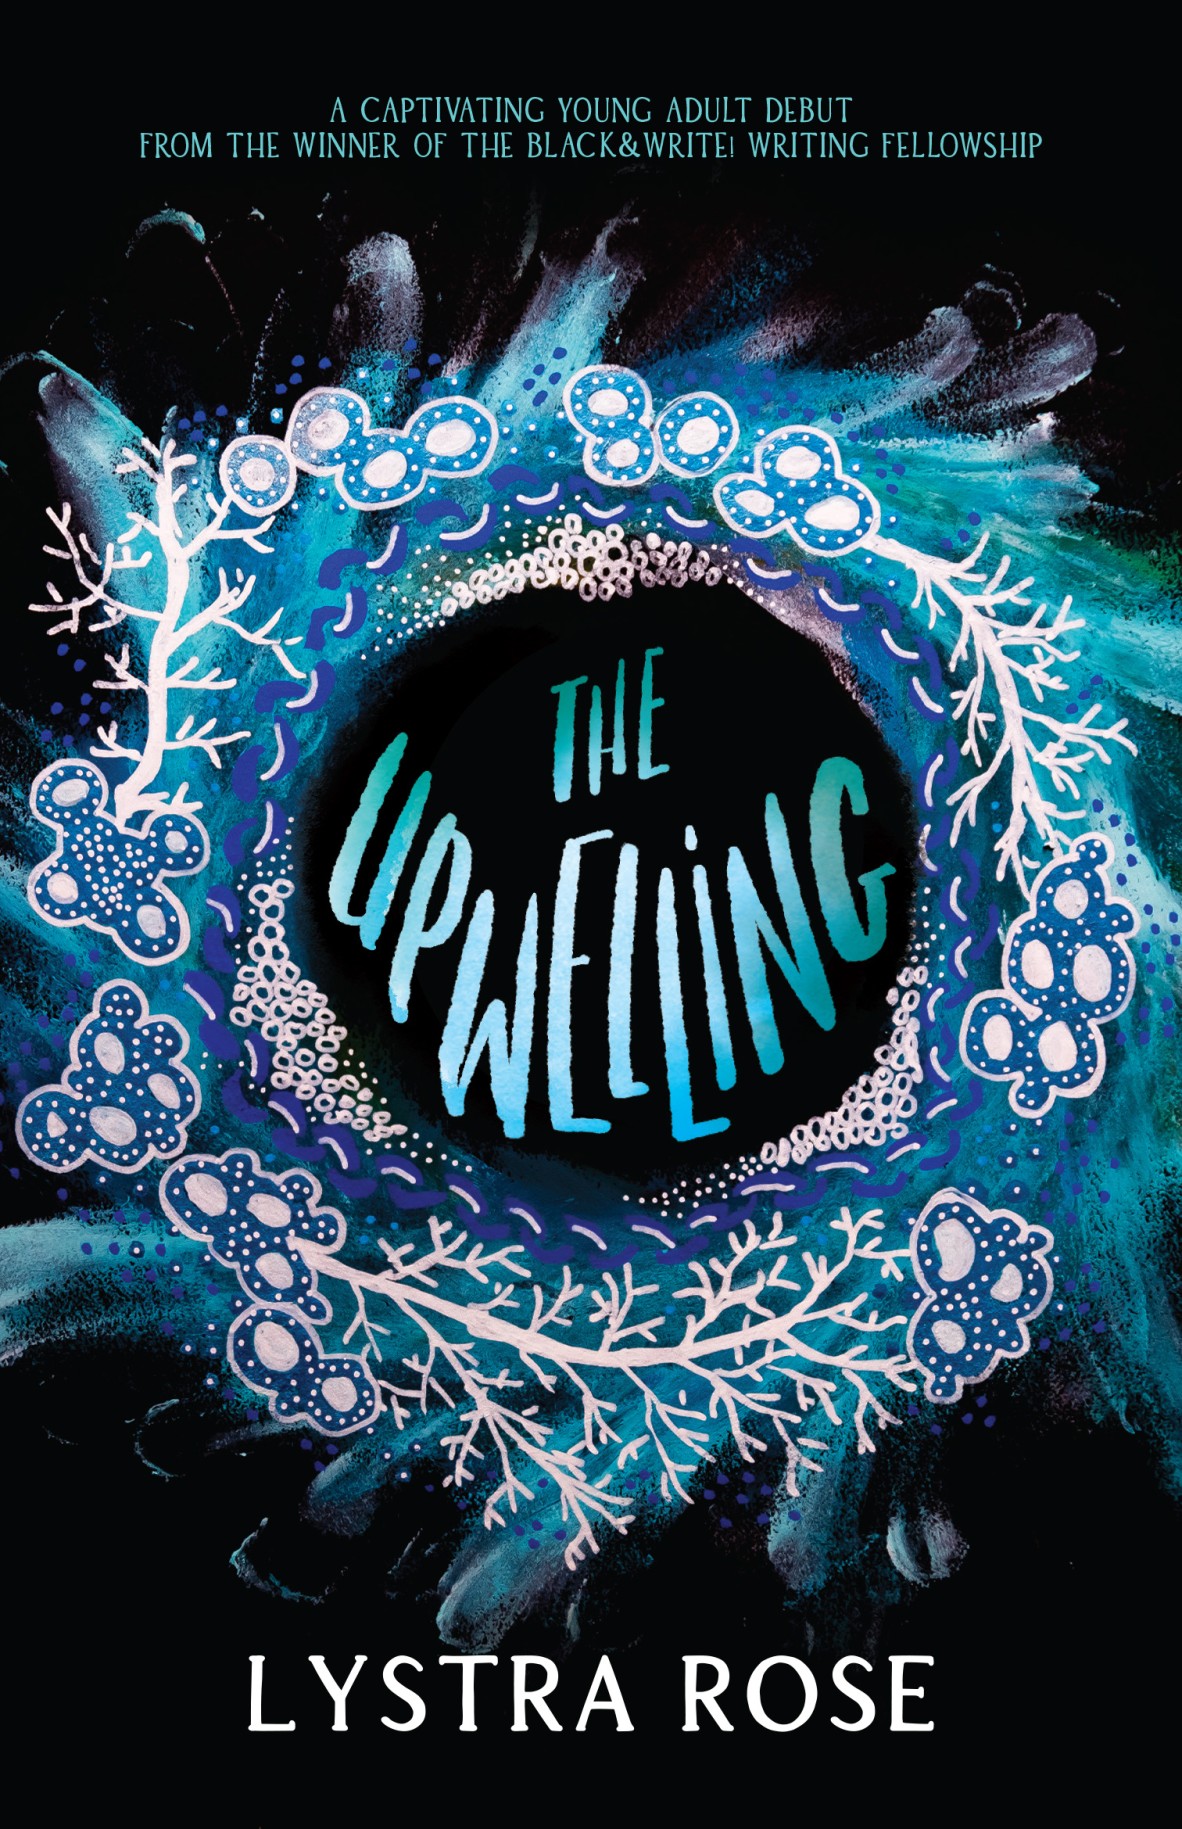 A black book cover with blue and white text Text reads a captivating young adult debut from the winner of the black and write writing Fellowship The Upwelling by Lystra Rose